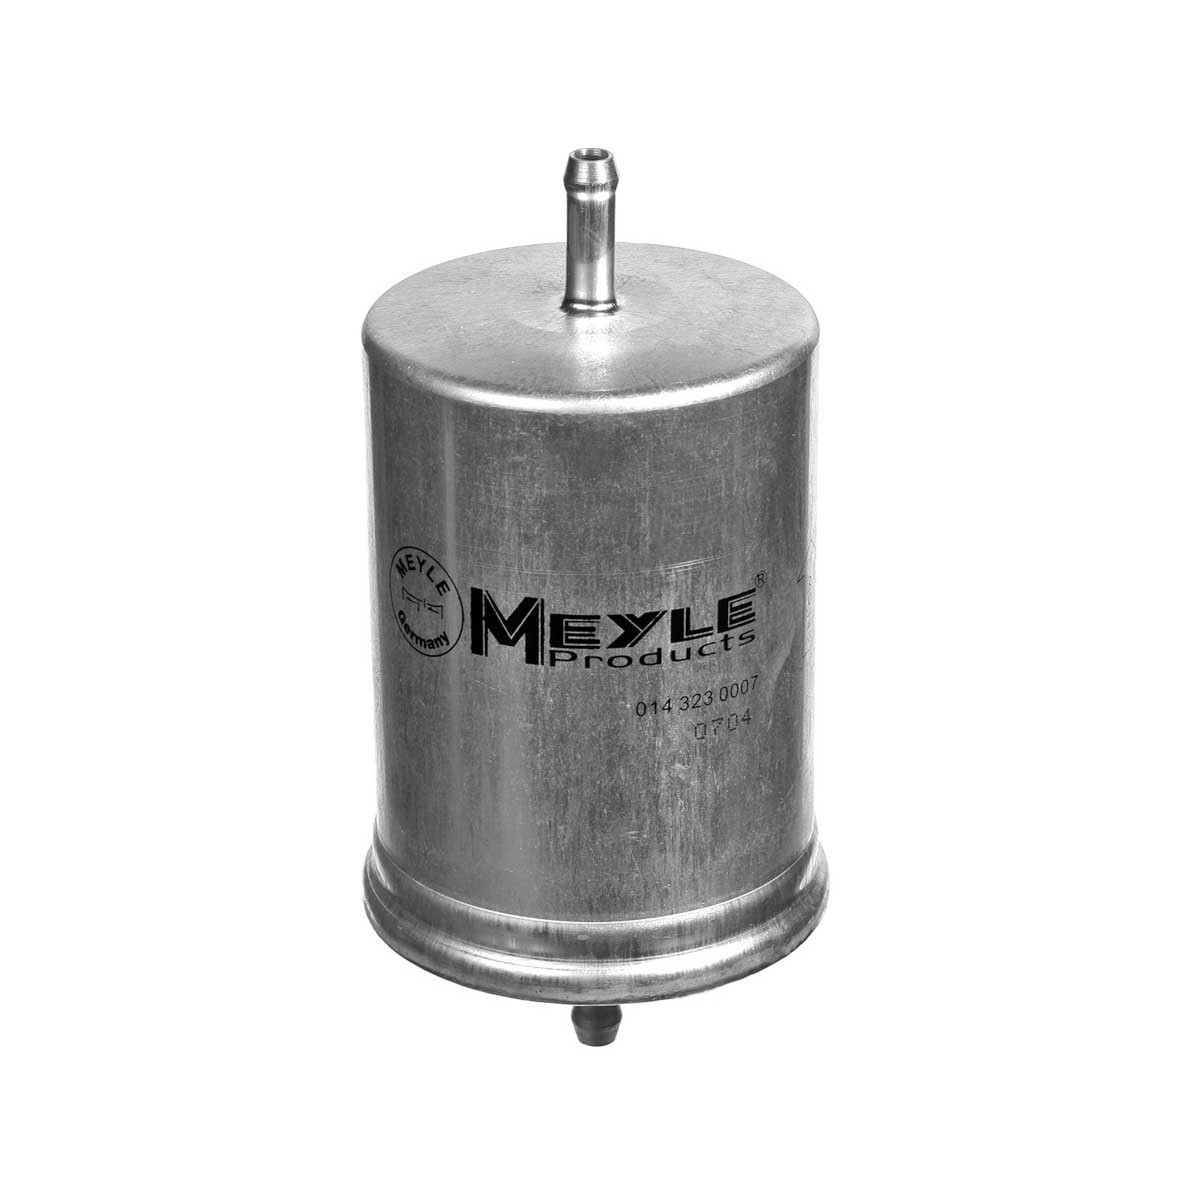 Great value for money - MEYLE Fuel filter 014 323 0007